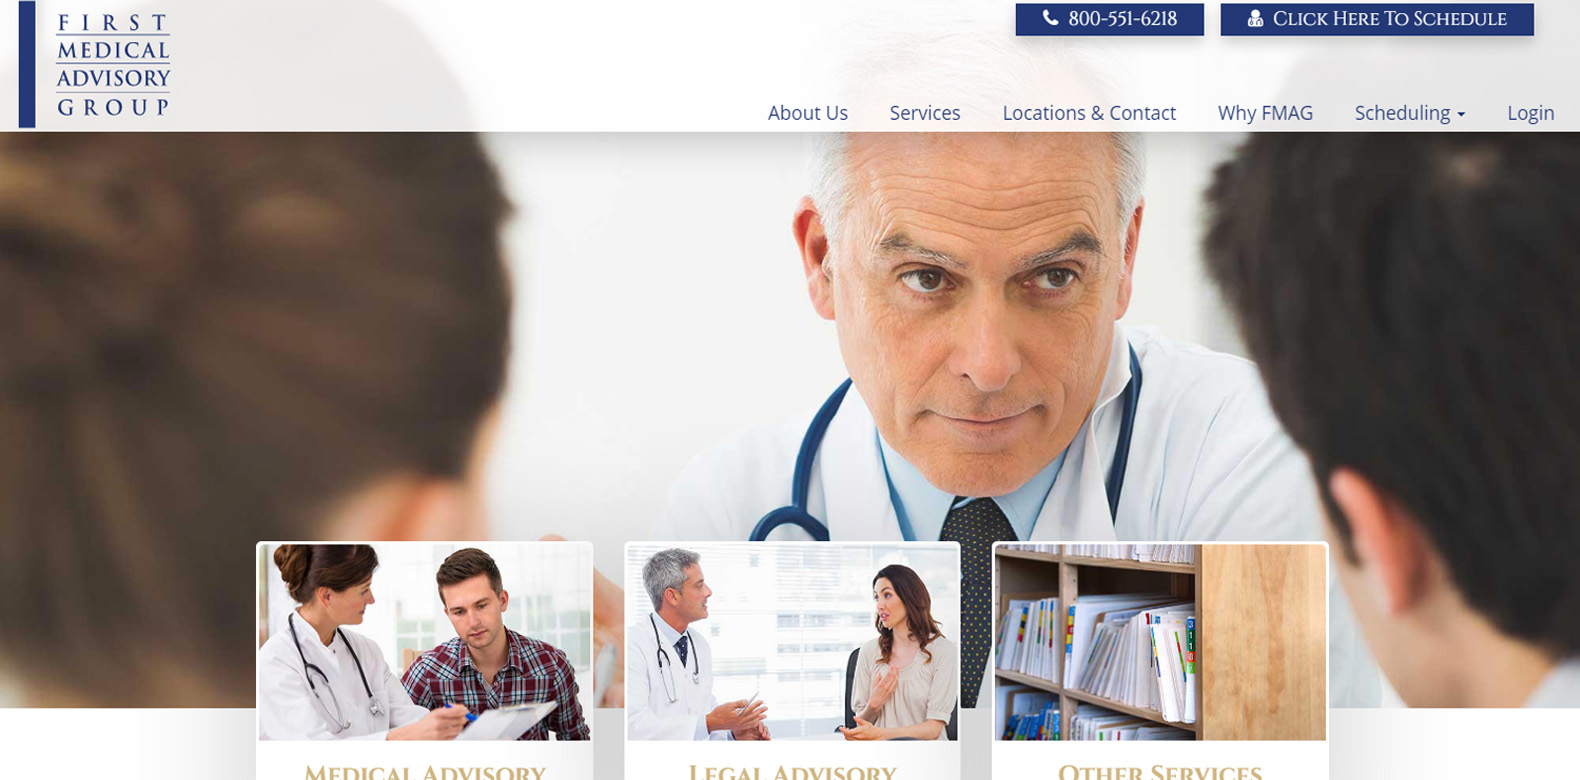 
New Website Launch: First Medical Advisory Group